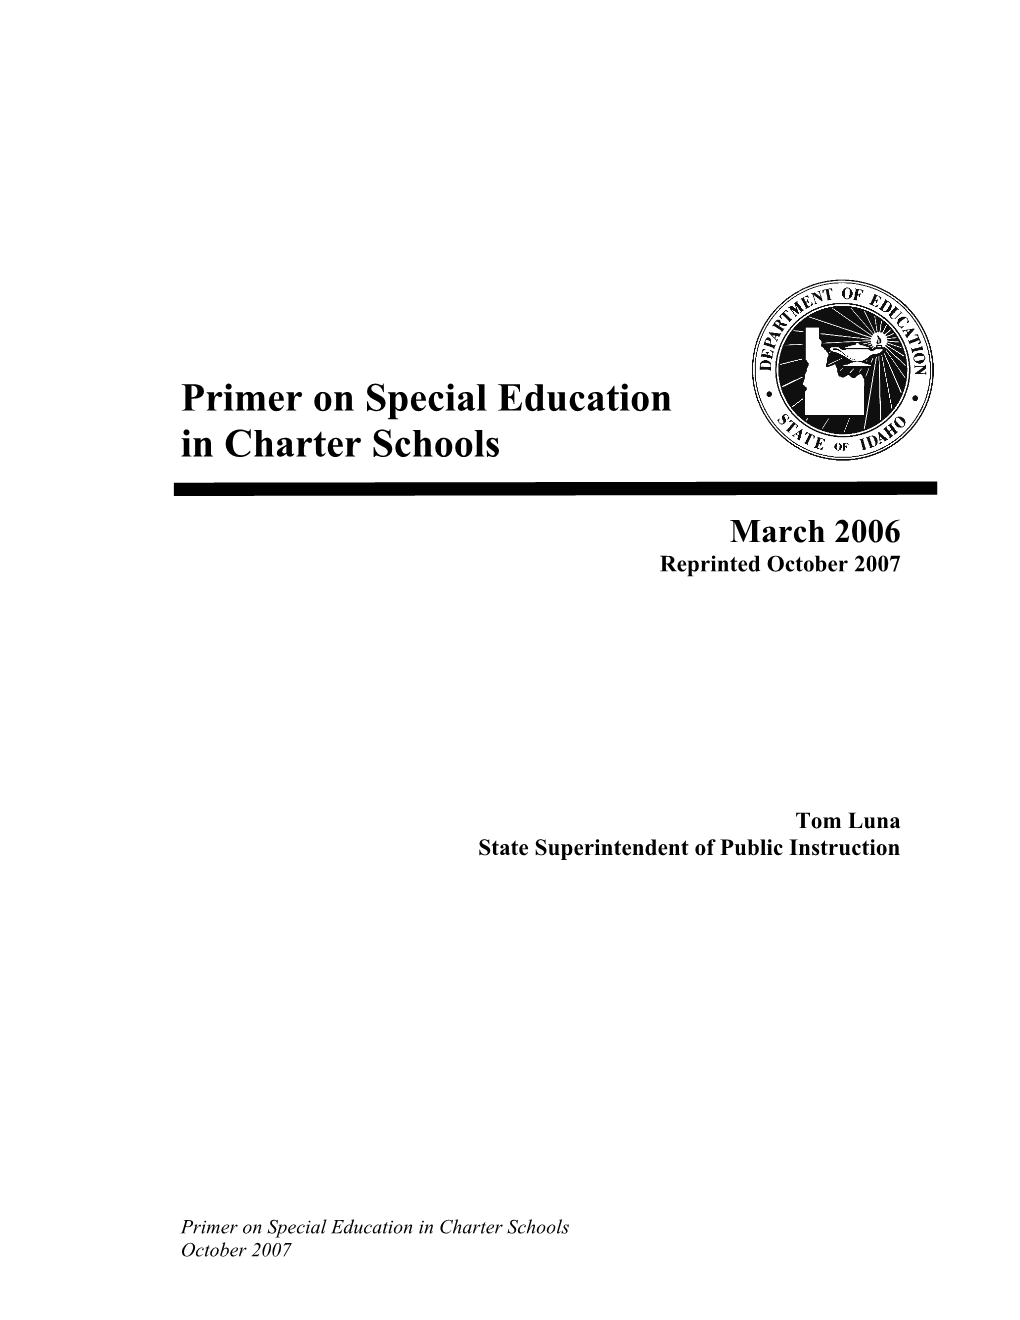 Idaho Primer on Special Education in Charter Schools